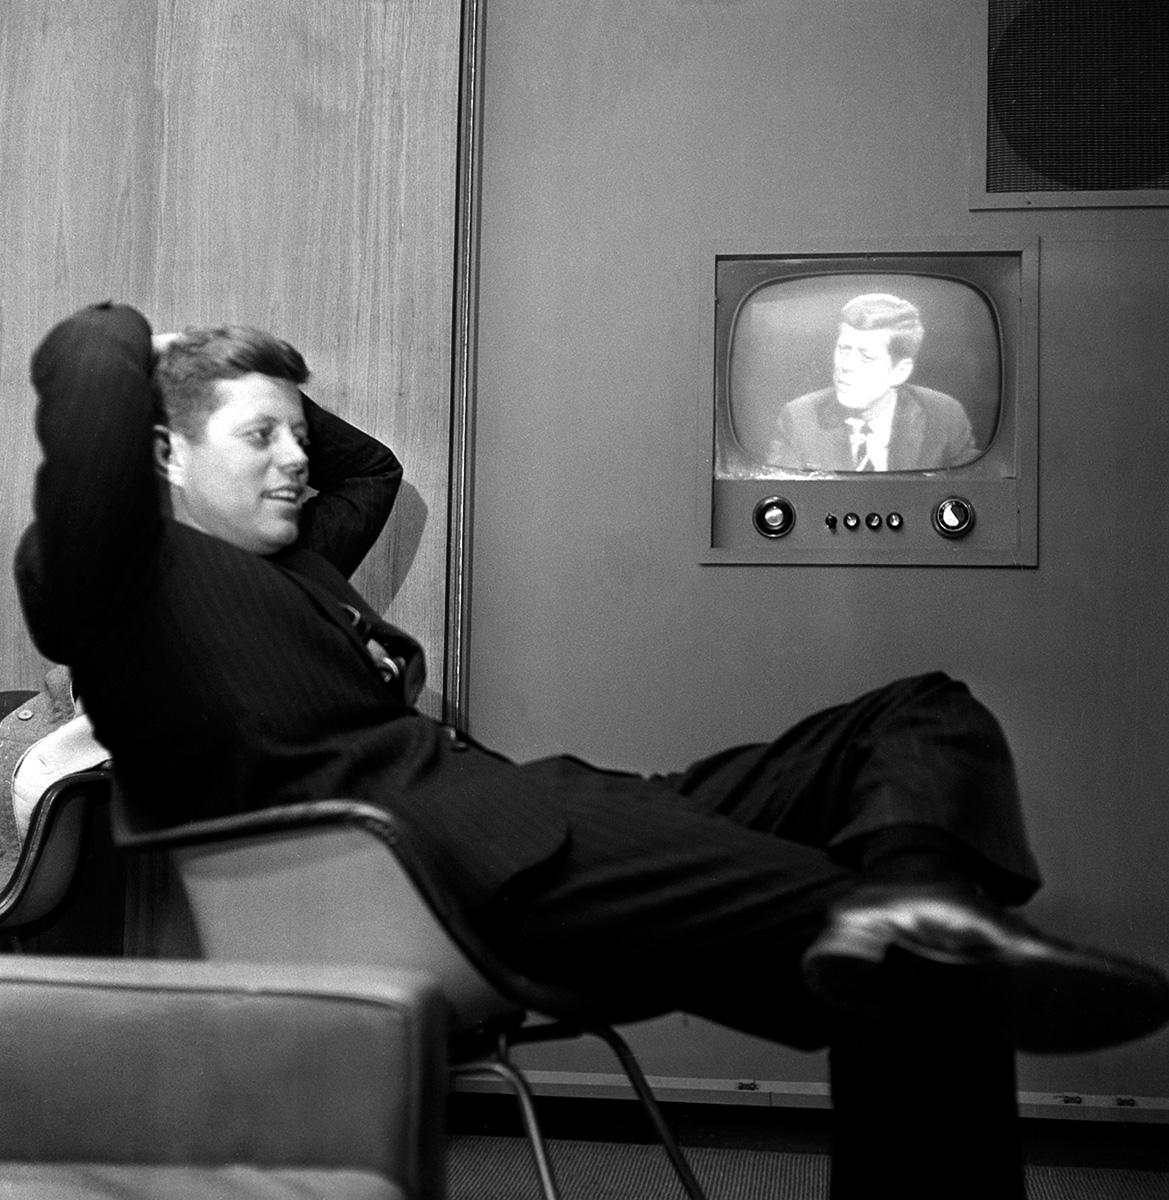 On the TV screen, a playback of Democratic presidential nominee John F. Kennedy’s campaign stop in 1960